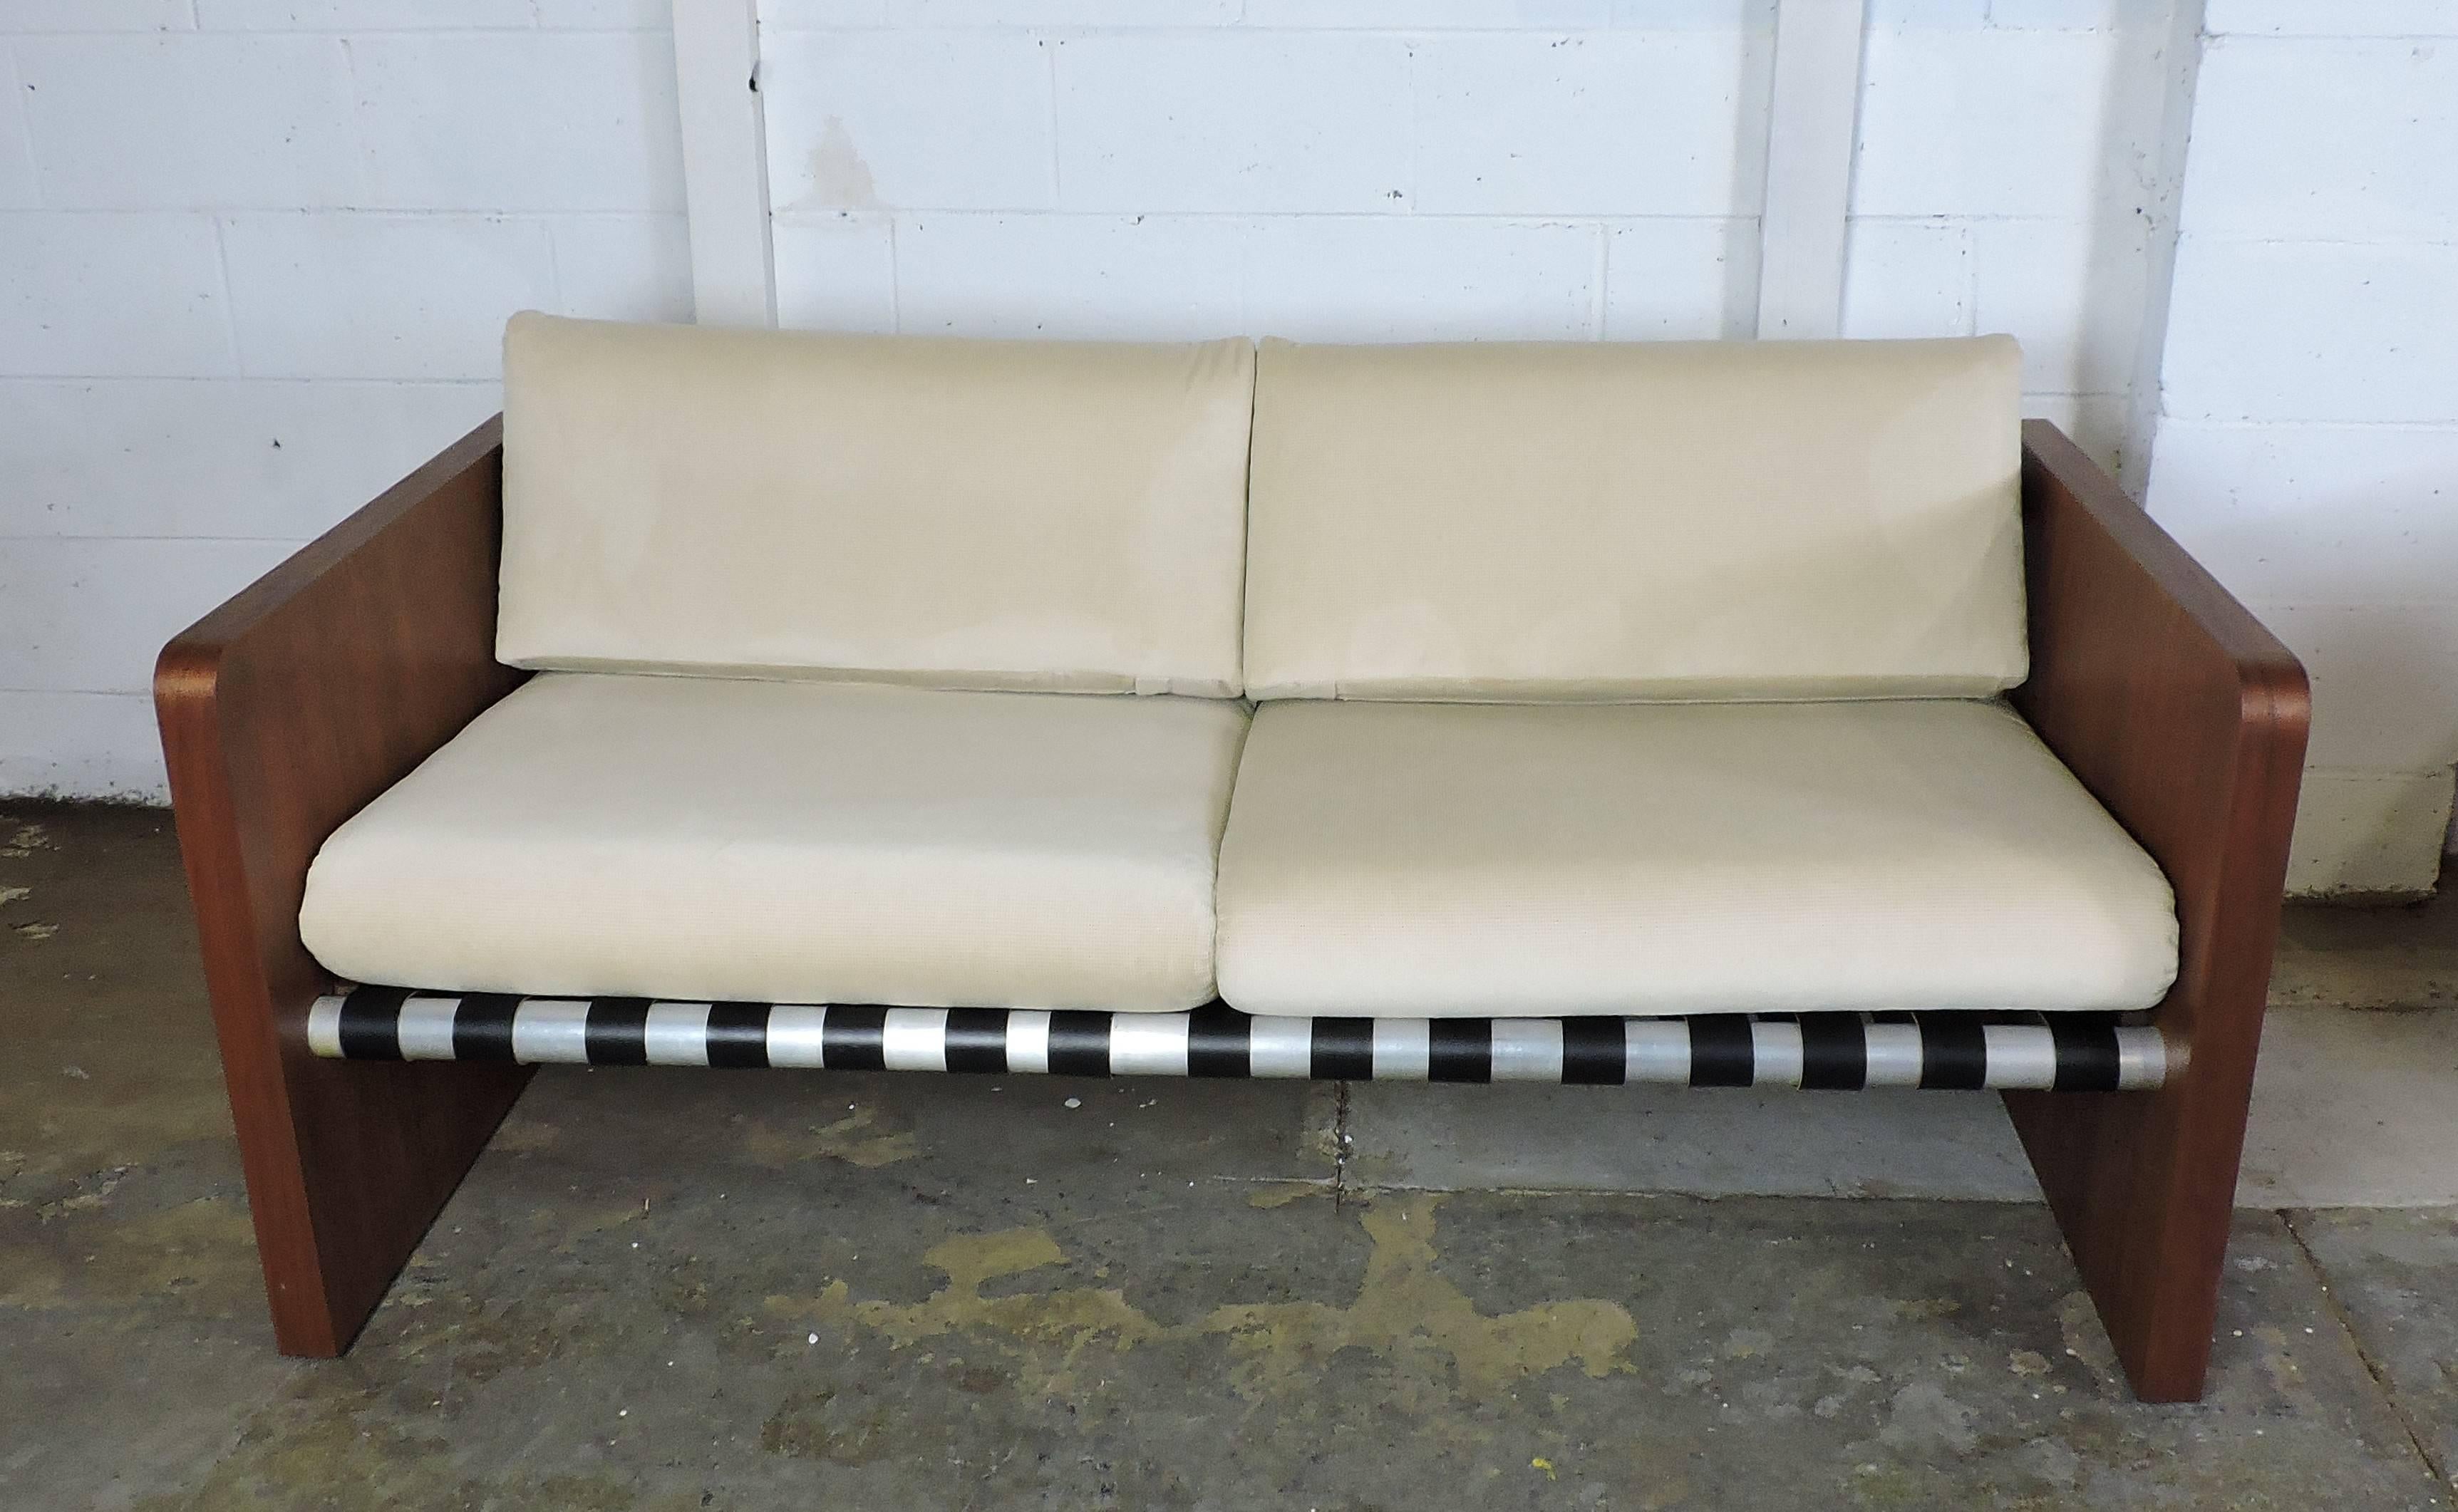 Fabulous pair of midcentury sling sofas manufactured by Founders Furniture Company. These sofas have a nice clean look with cushions that rest on black leather slings that are attached to three heavy-duty polished aluminum poles. The sides have